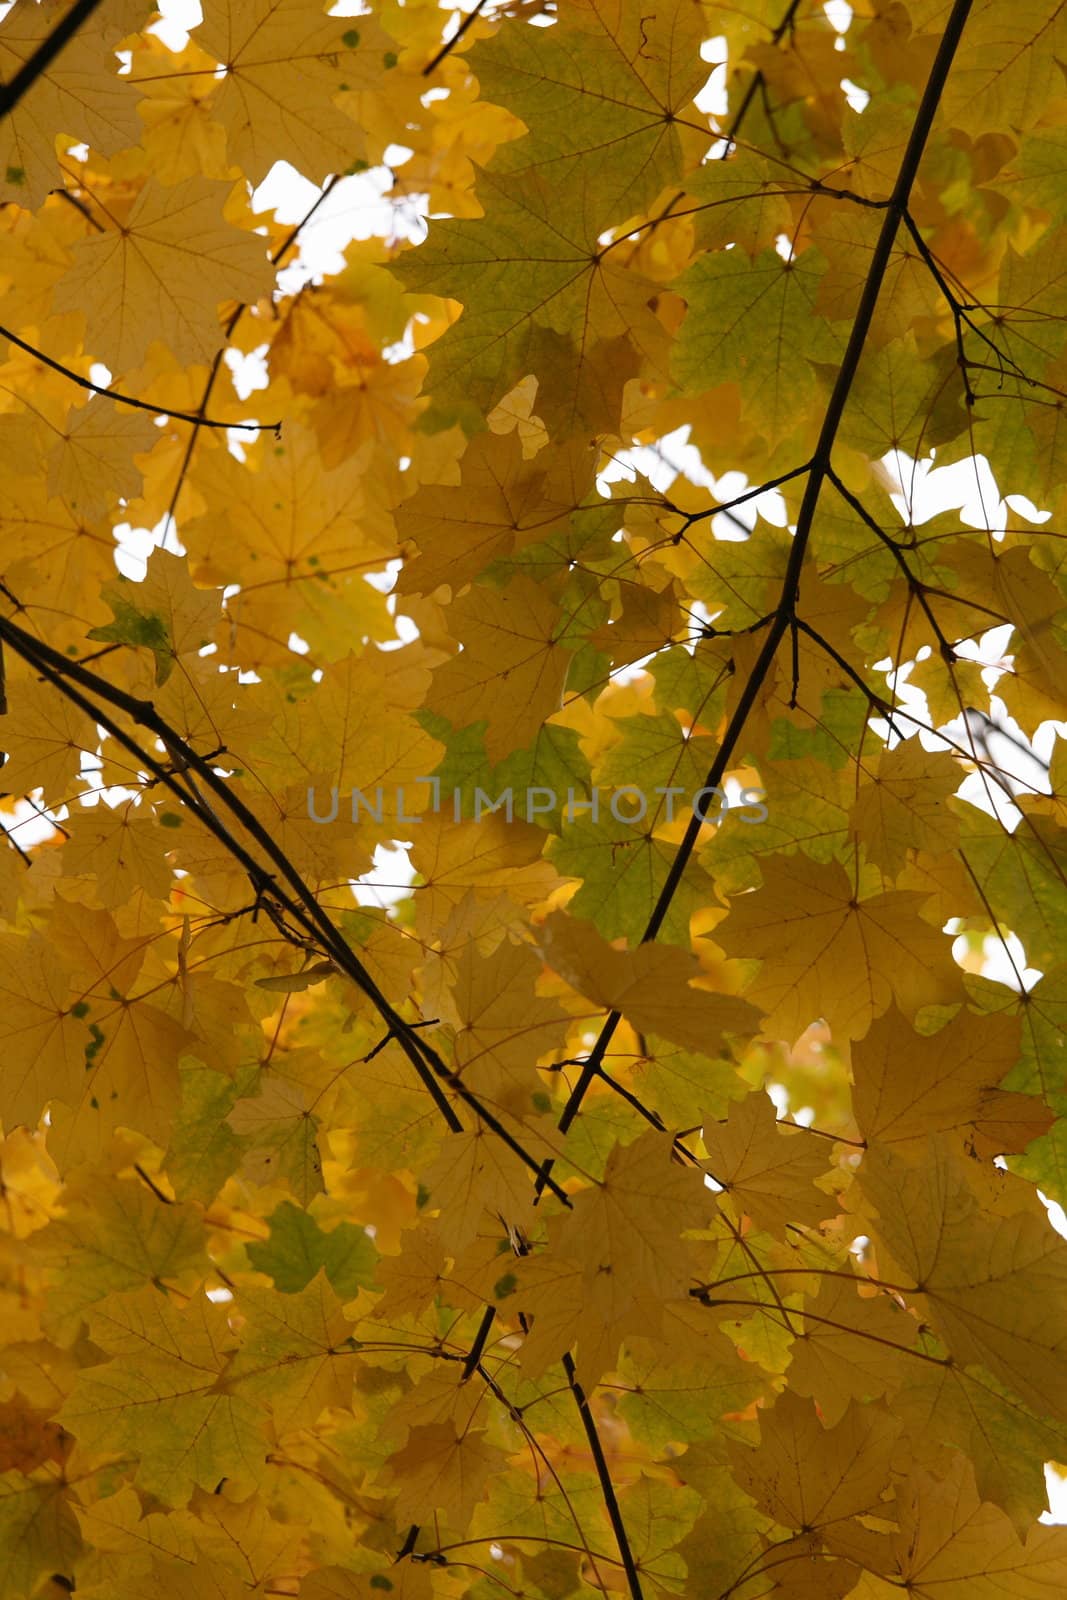 Some october golden maple leaves closing the sky